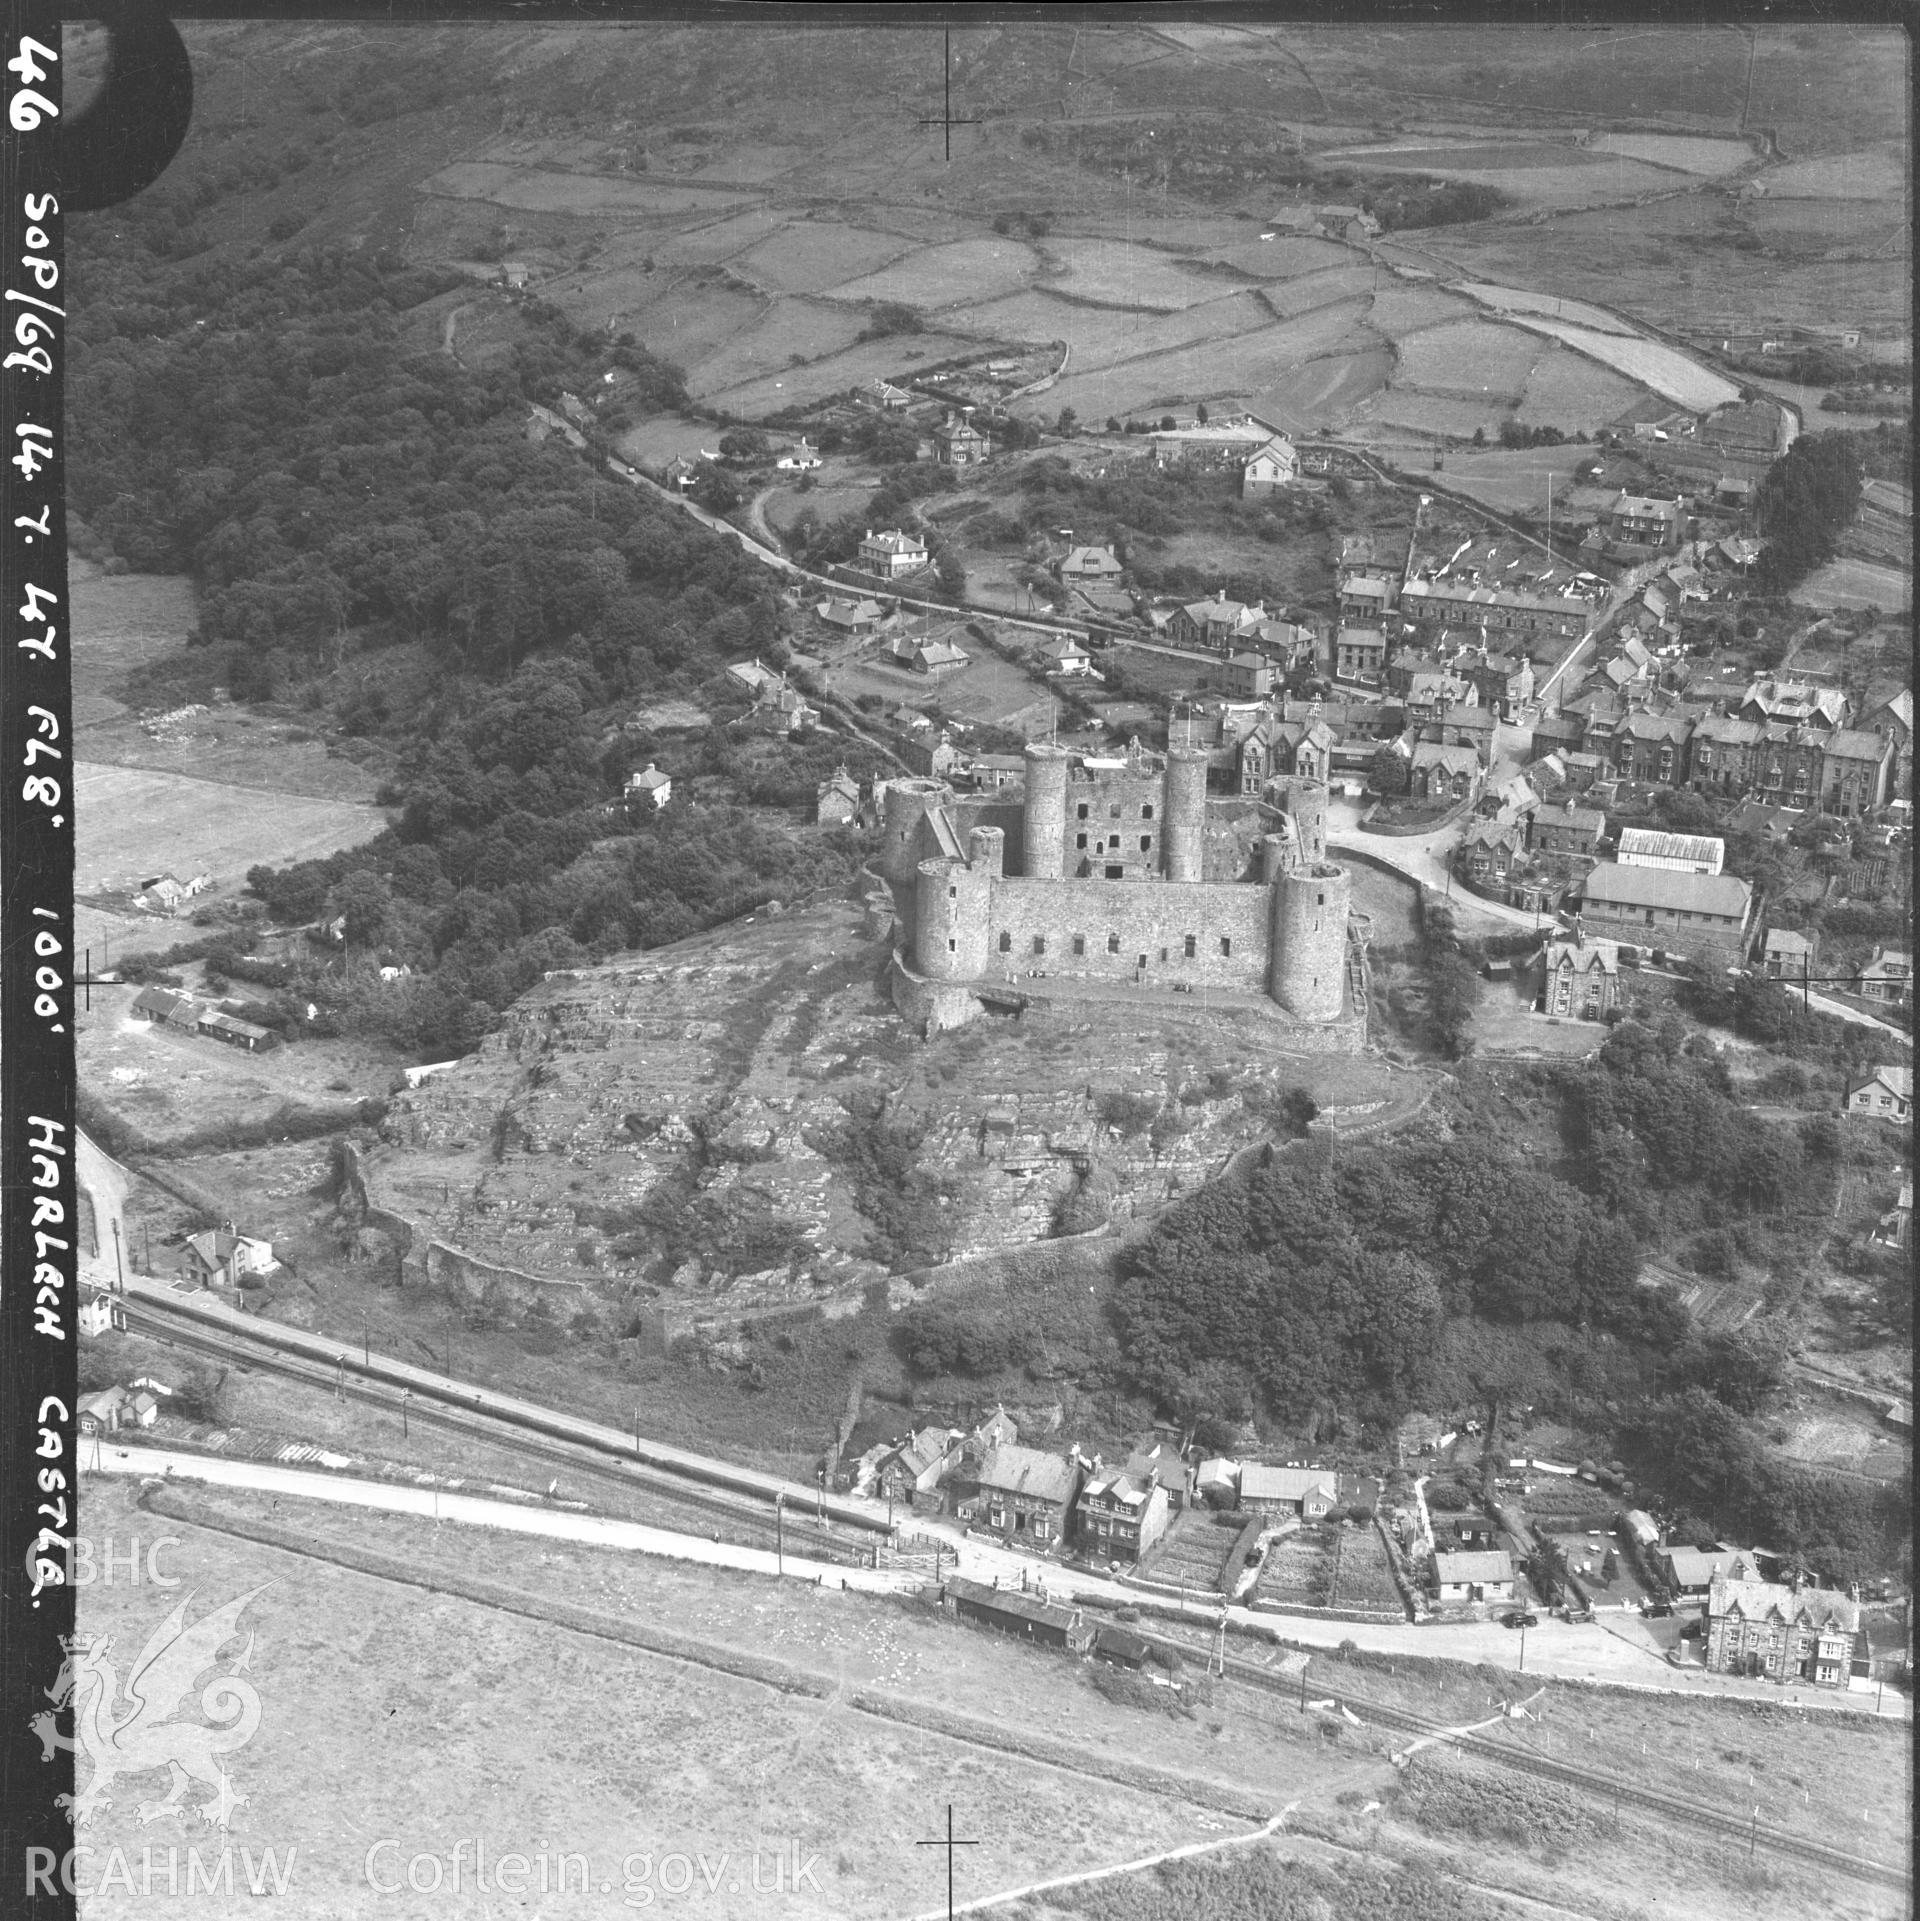 Digital copy of a nitrate negative showing view of Harlech Castle, dated 1947.